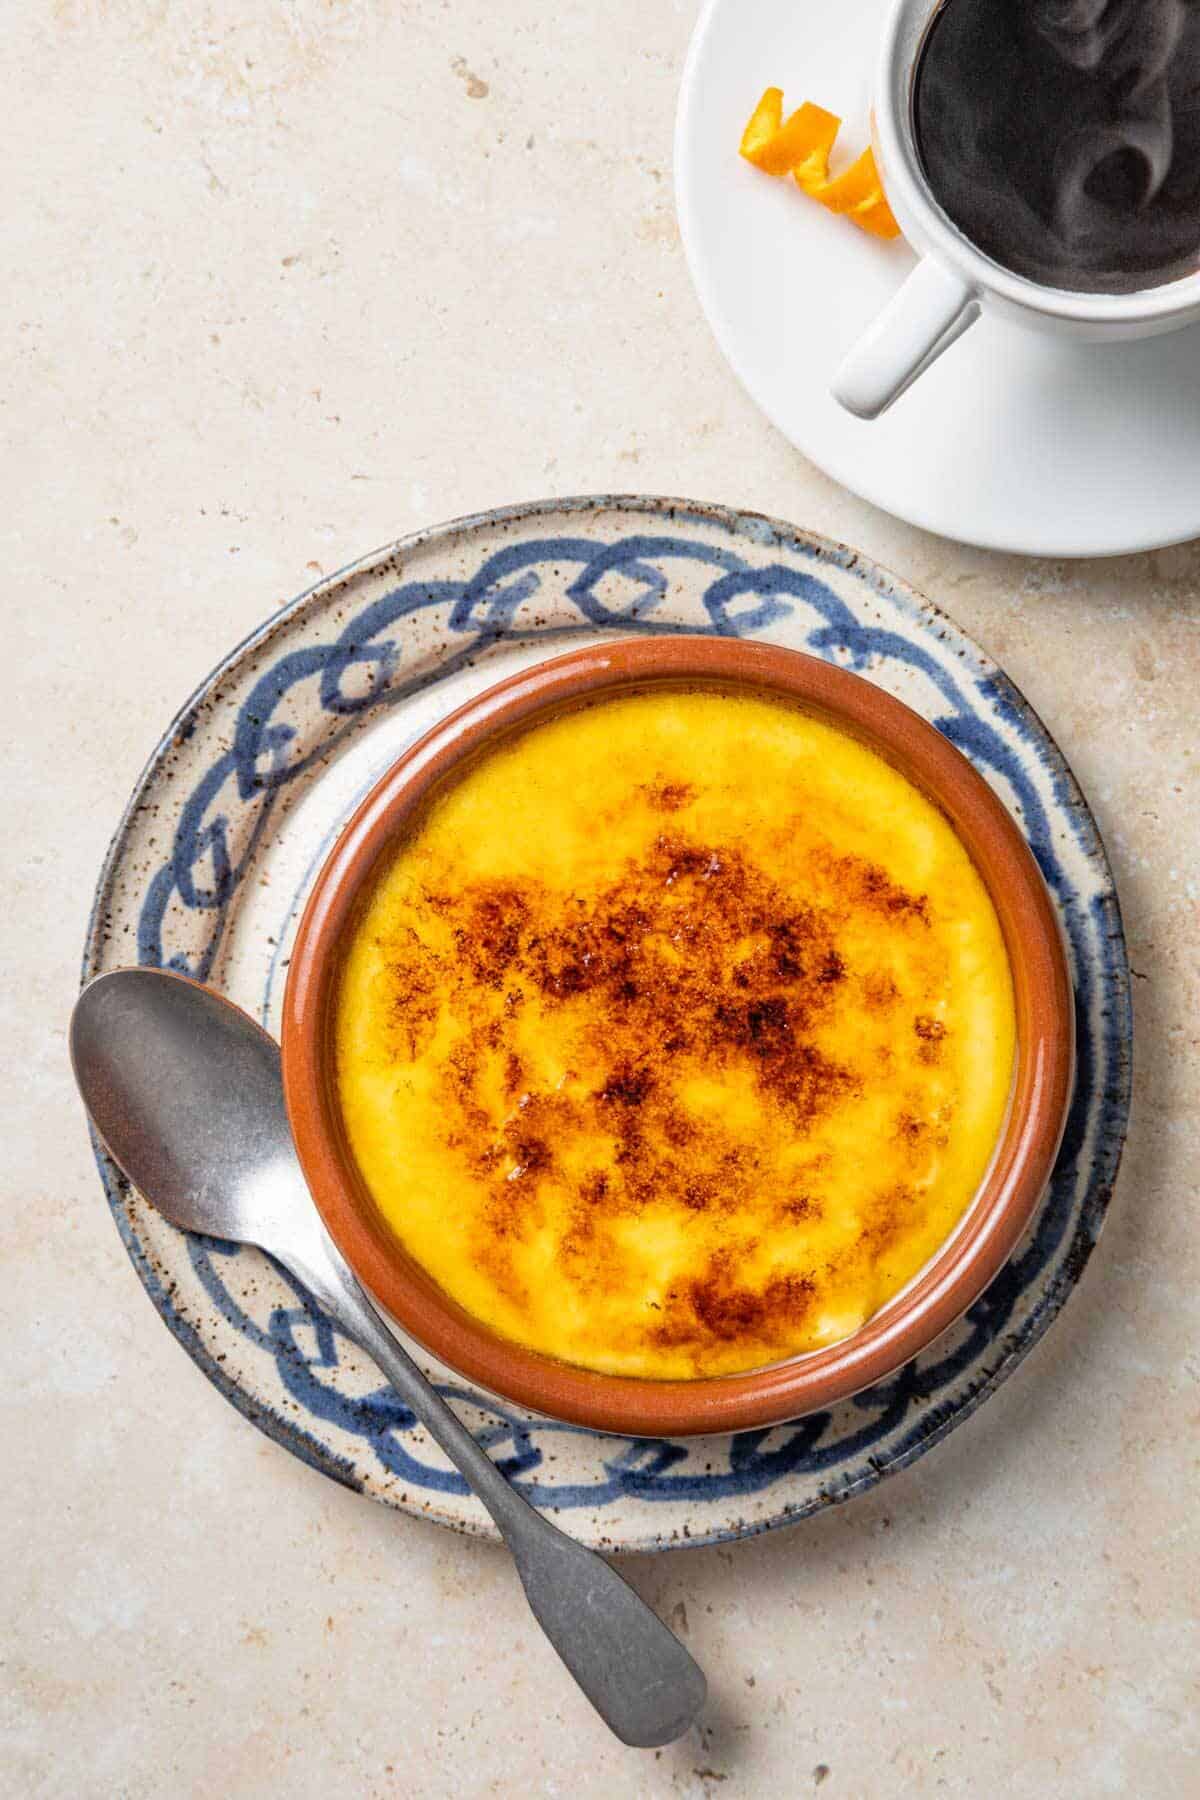 Overhead shot of Crema Catalana with a silver spoon, coffee, and an orange zest twist on the side.